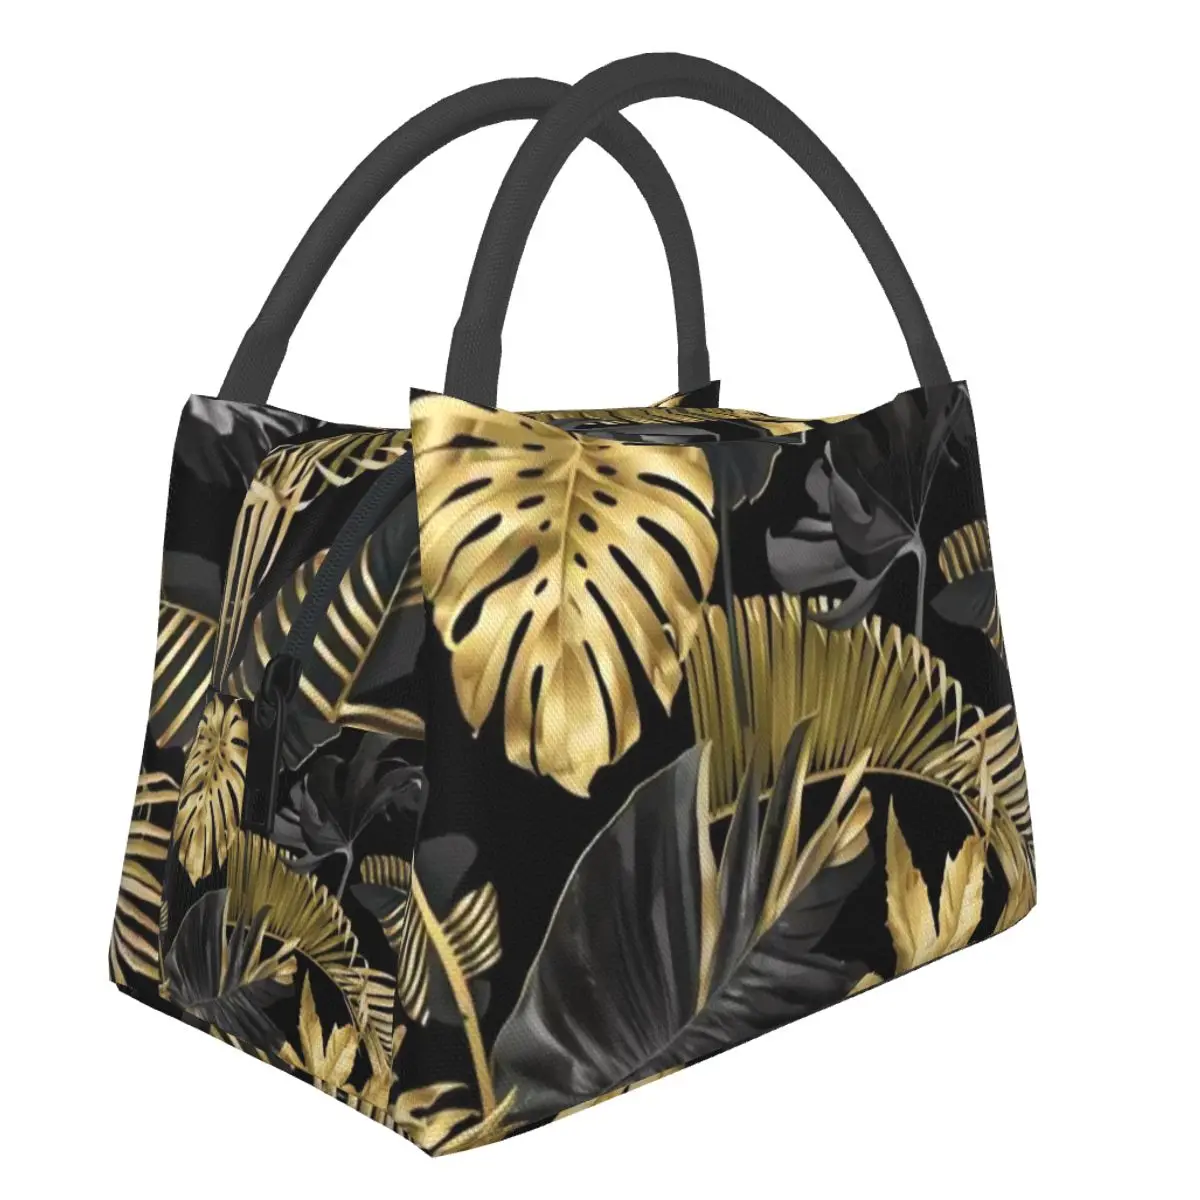 

NOISYDESIGNS Hawaiian Portable Cooler Handbag Tote Lunch Bag Tropical Palm Leaves Print Lunch Bento Pouch Container Food Bags